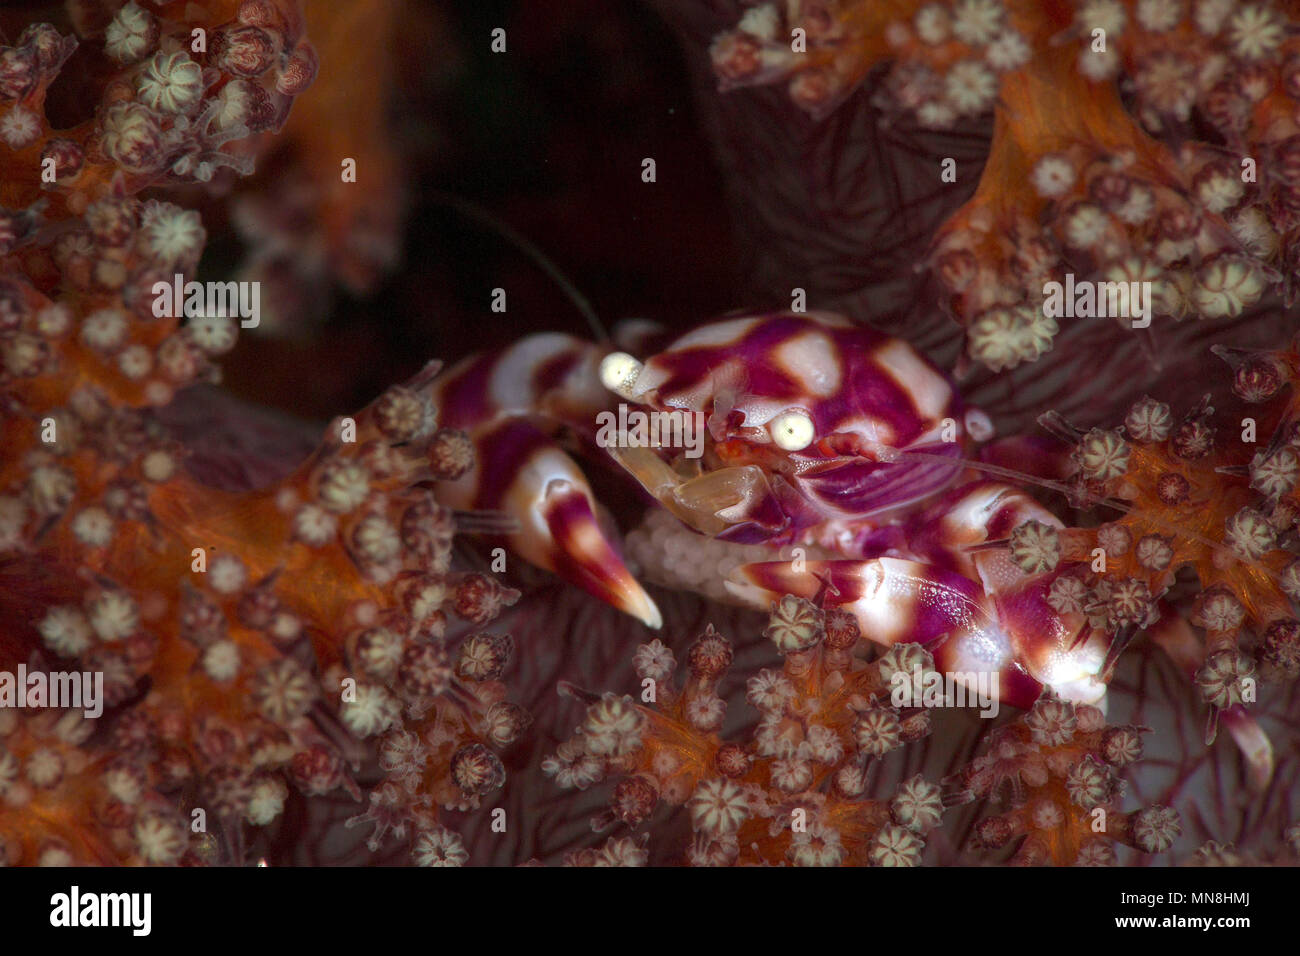 Soft Coral Porcelain Crab (Lissoporcellana nakasonei) carrying the eggs. Picture was taken in Anilao, Philippines Stock Photo